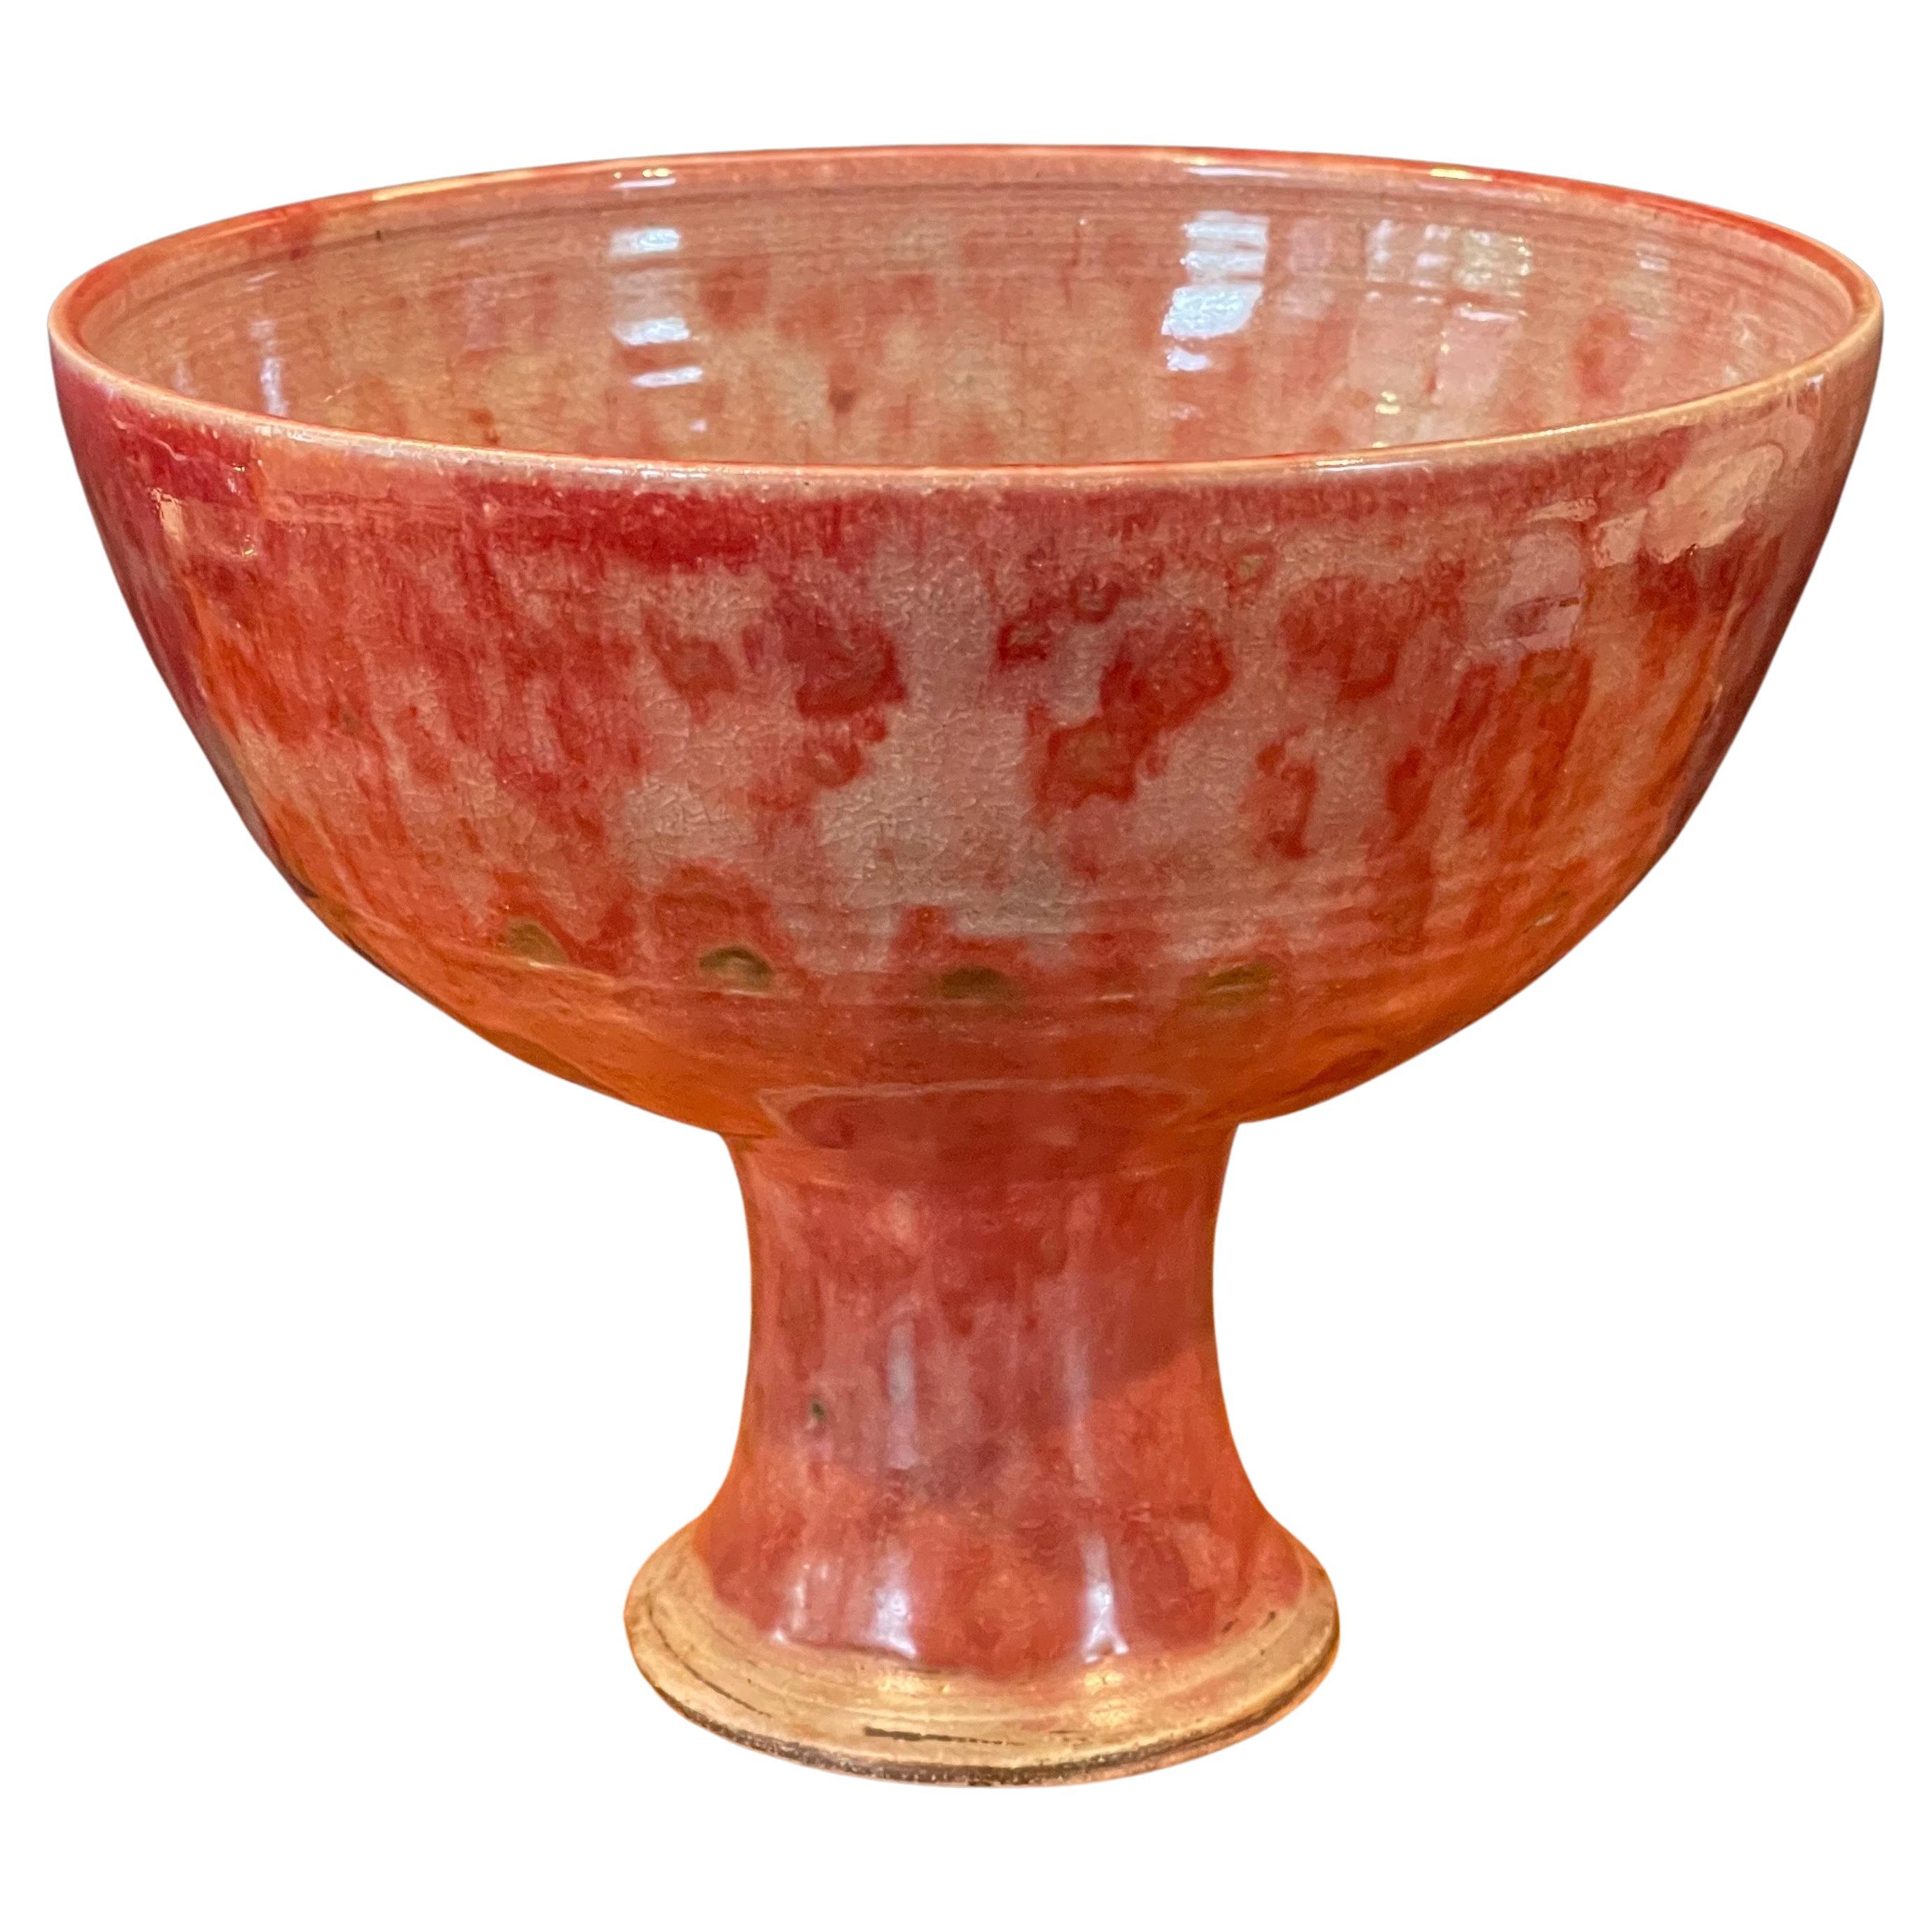 MCM stoneware studio pottery bowl on pedestal by listed artist, Amy Donaldson, circa 1967. This gorgeous hand finished piece has a wonderful design, texture and color. The bowl is in very good condition with no chips or cracks (some monor crazing)